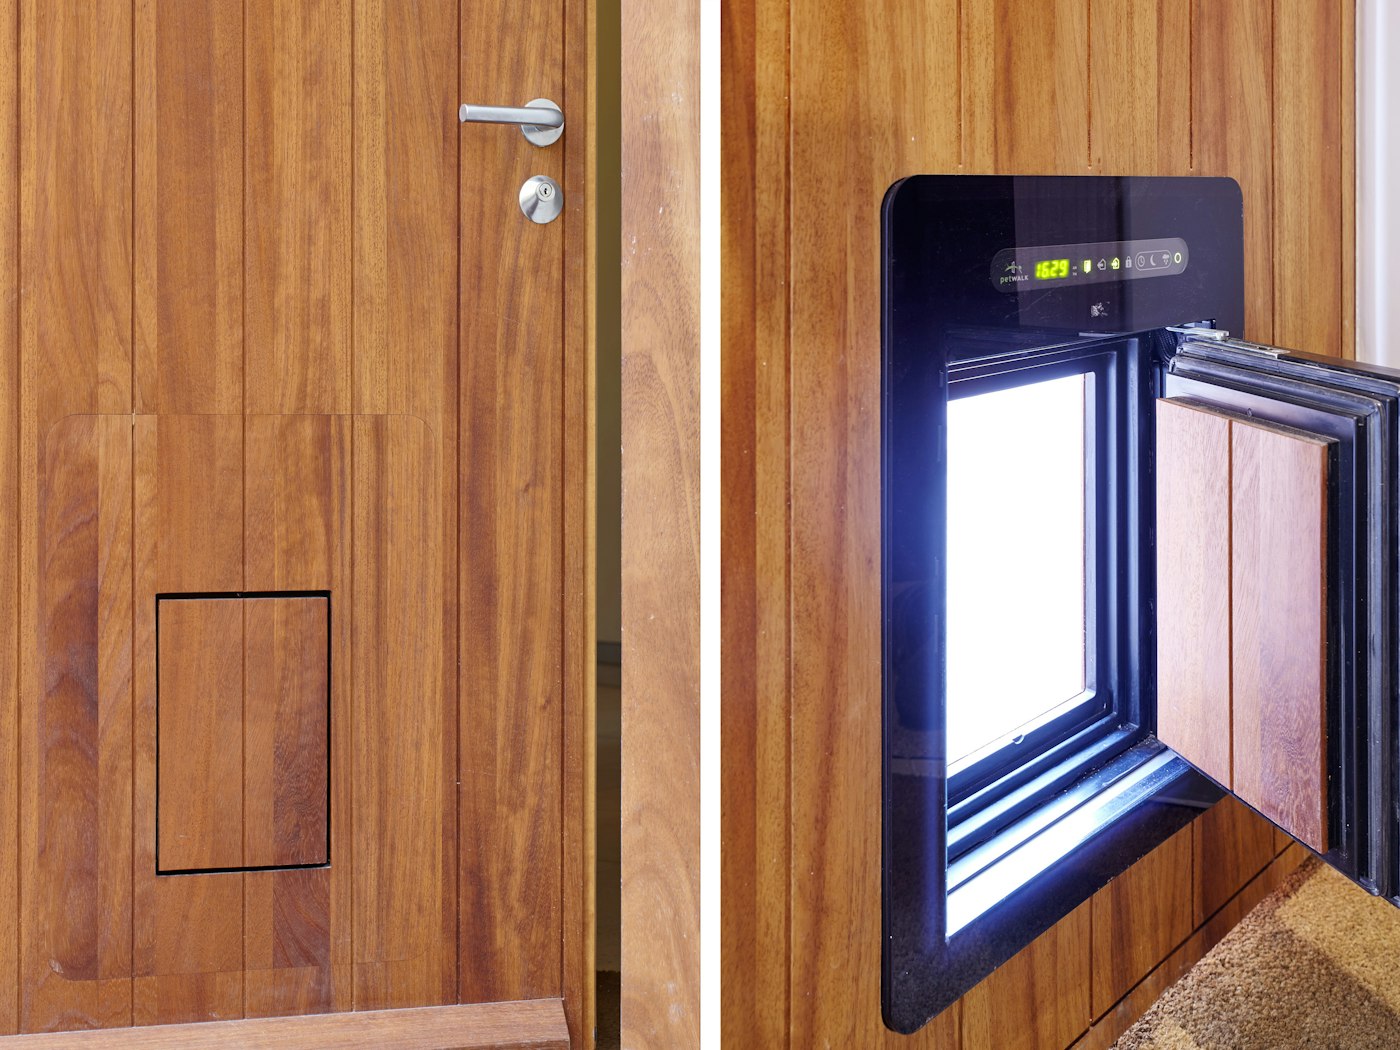 For all animal lovers - this automated pet flap is also passive house certified